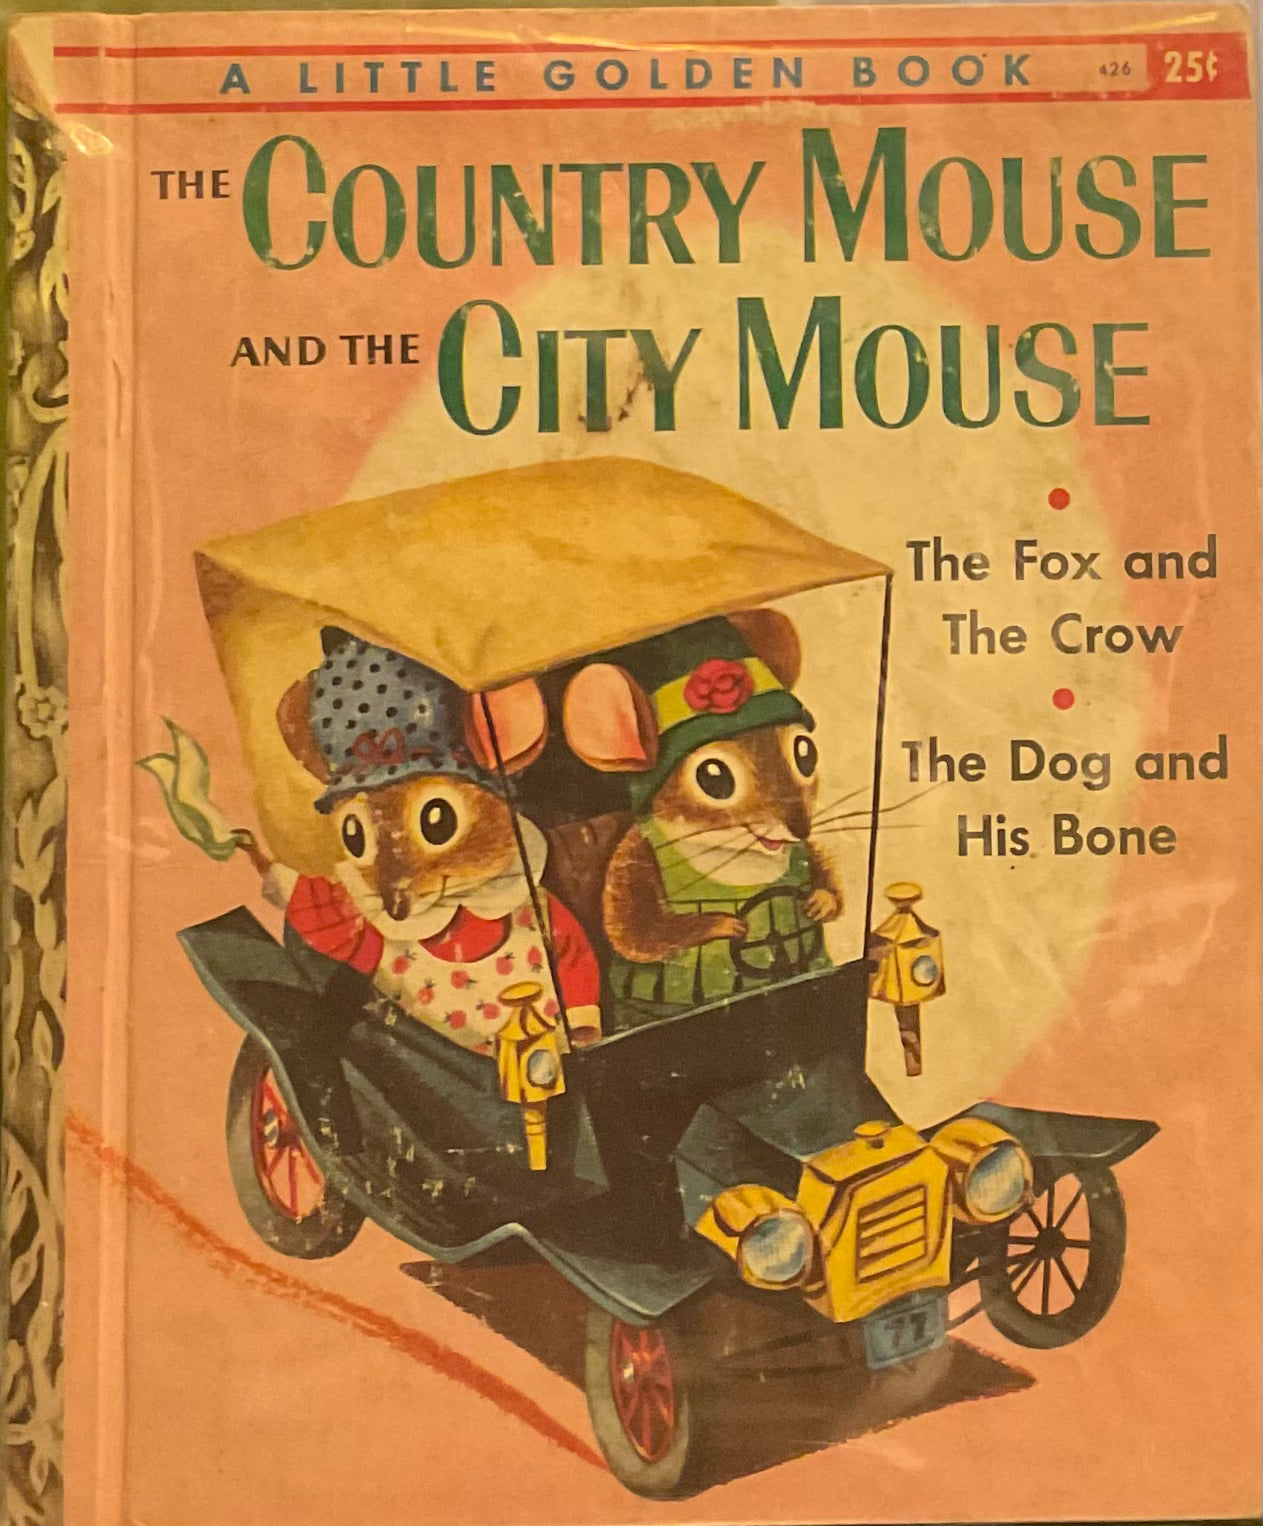 The Country Mouse And The City Mouse, Patricia Scarry